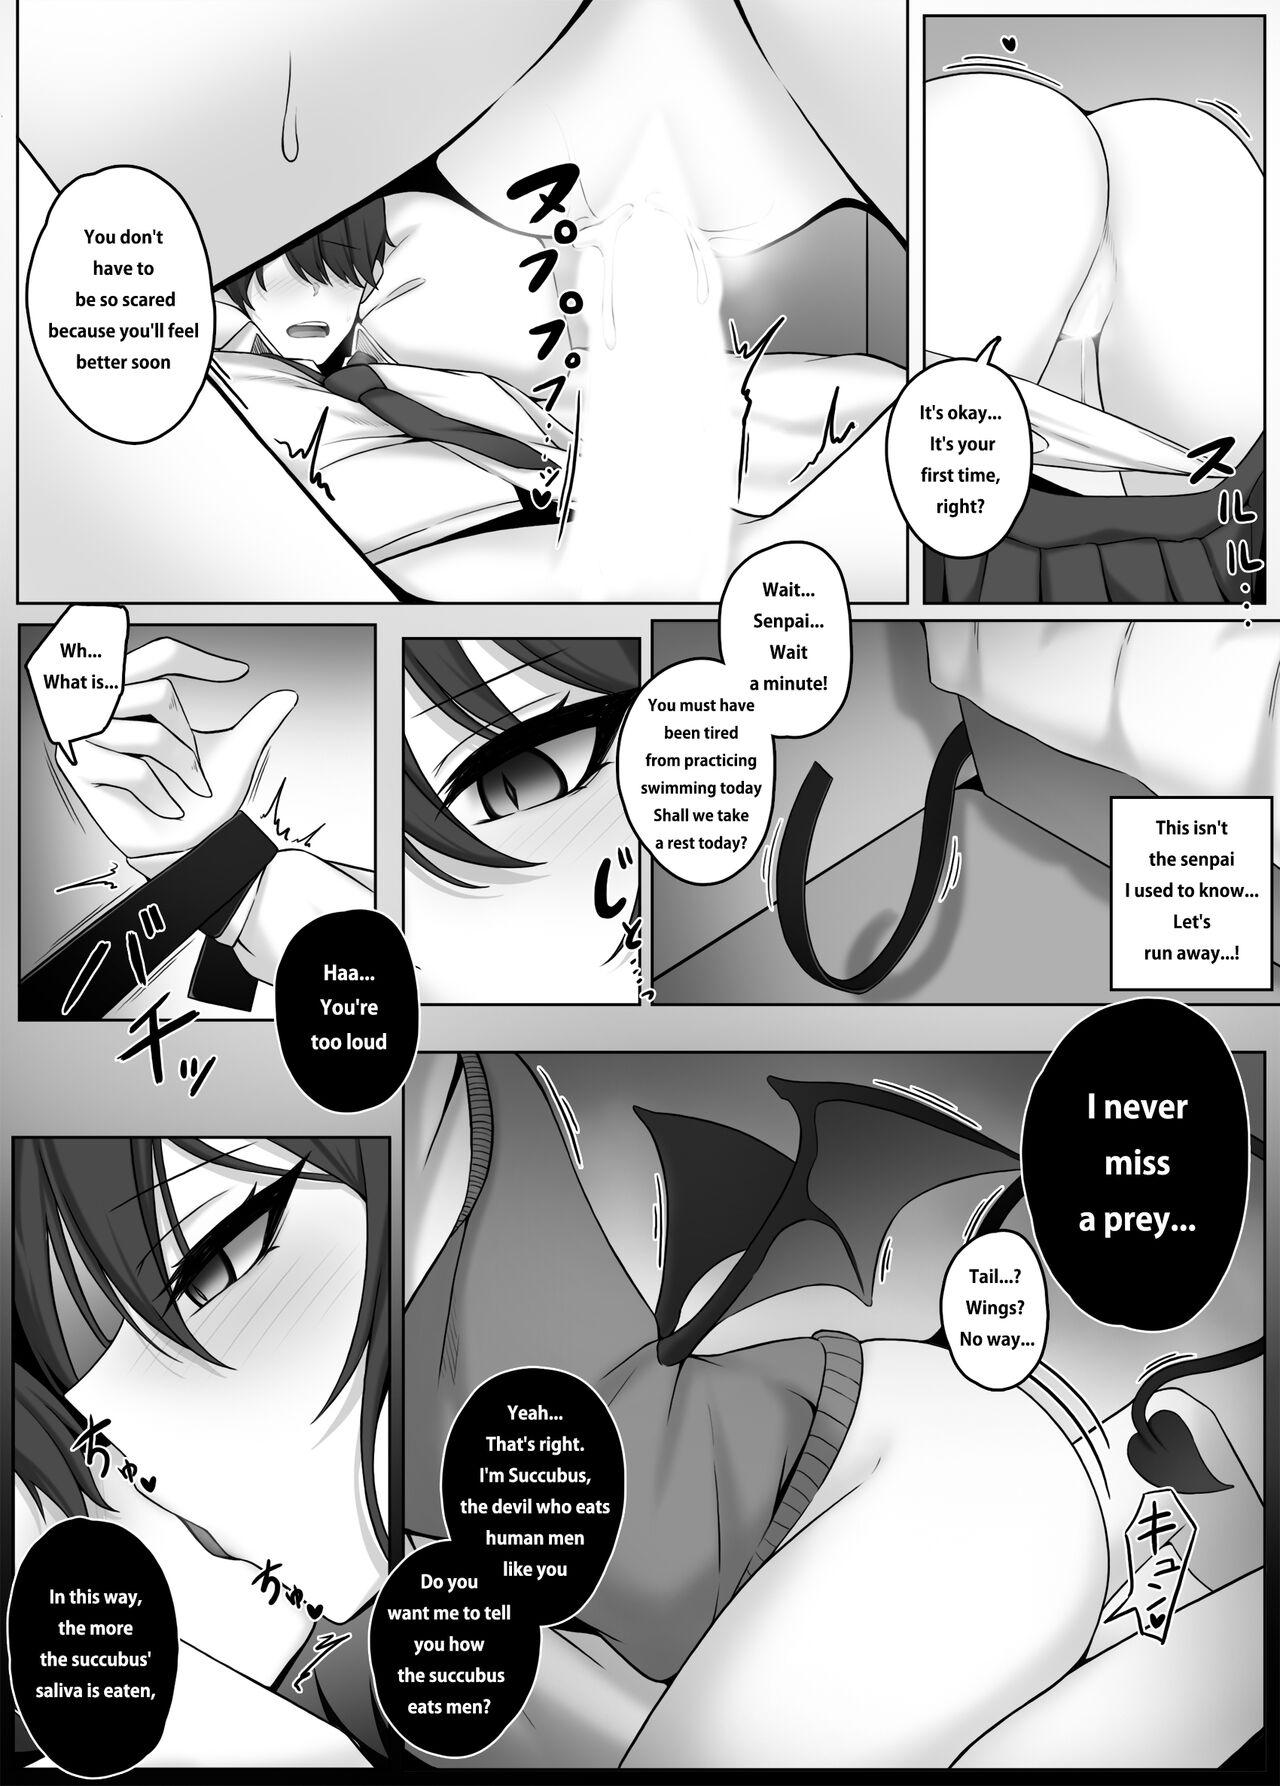 Toy Succubus House Gaydudes - Page 5